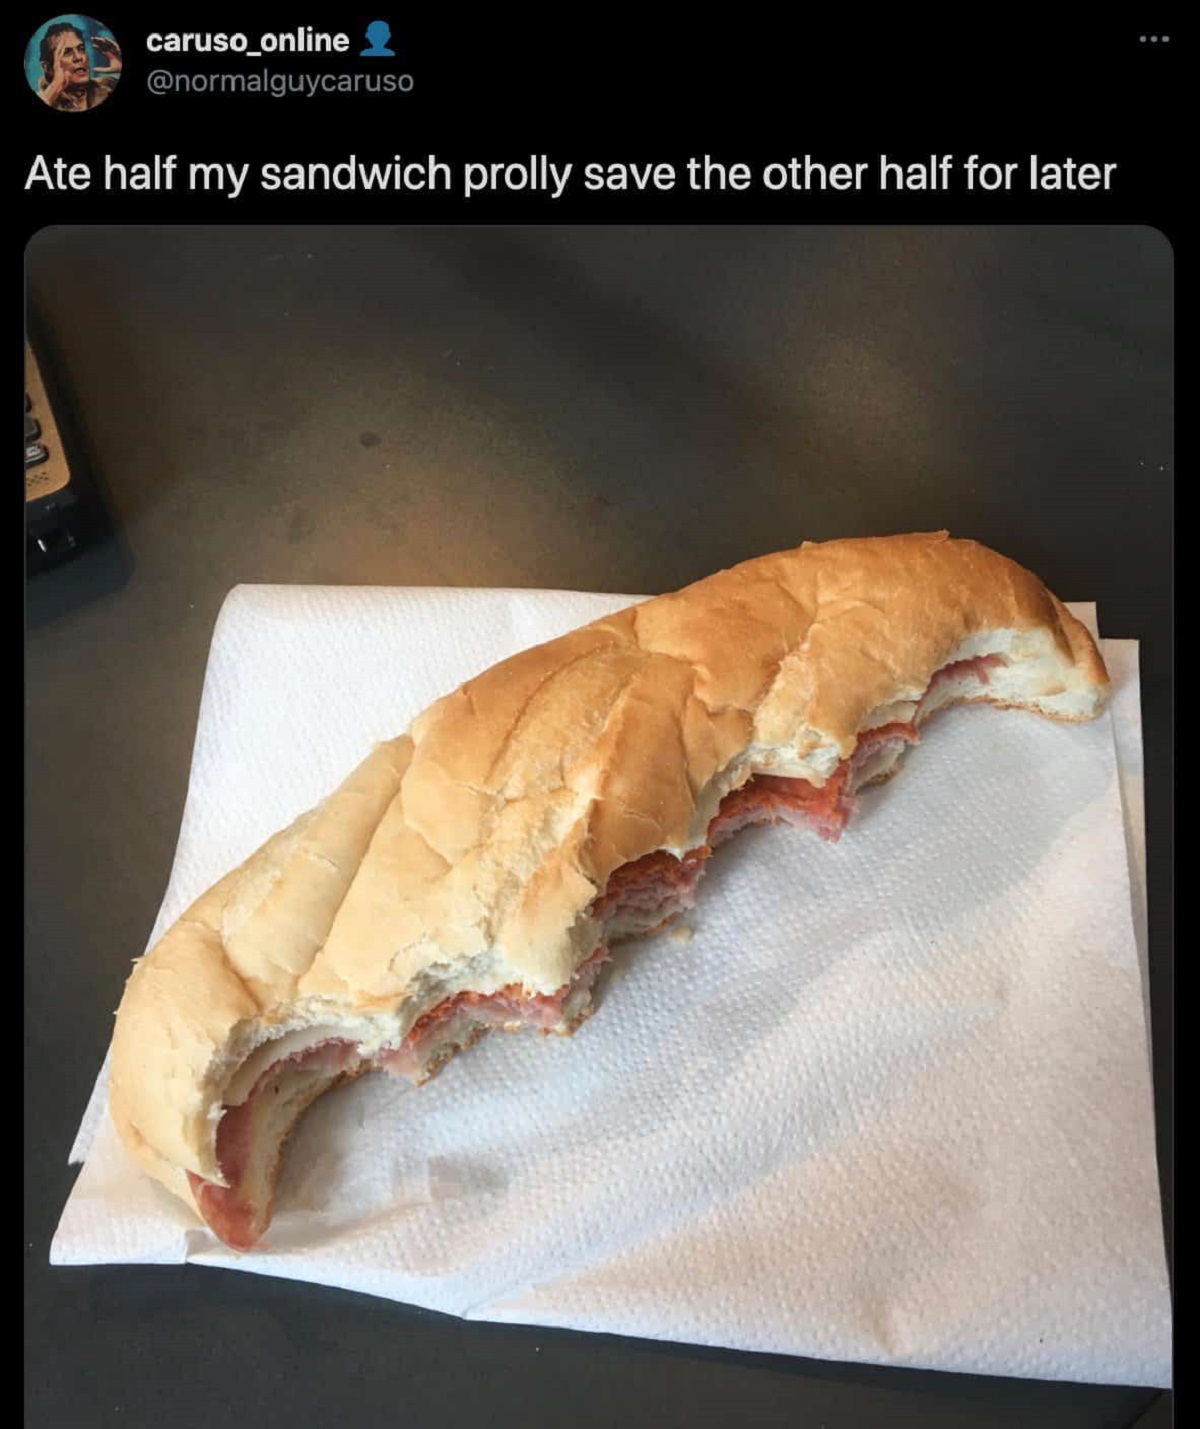 ate half my sandwich meme - caruso_online Ate half my sandwich prolly save the other half for later